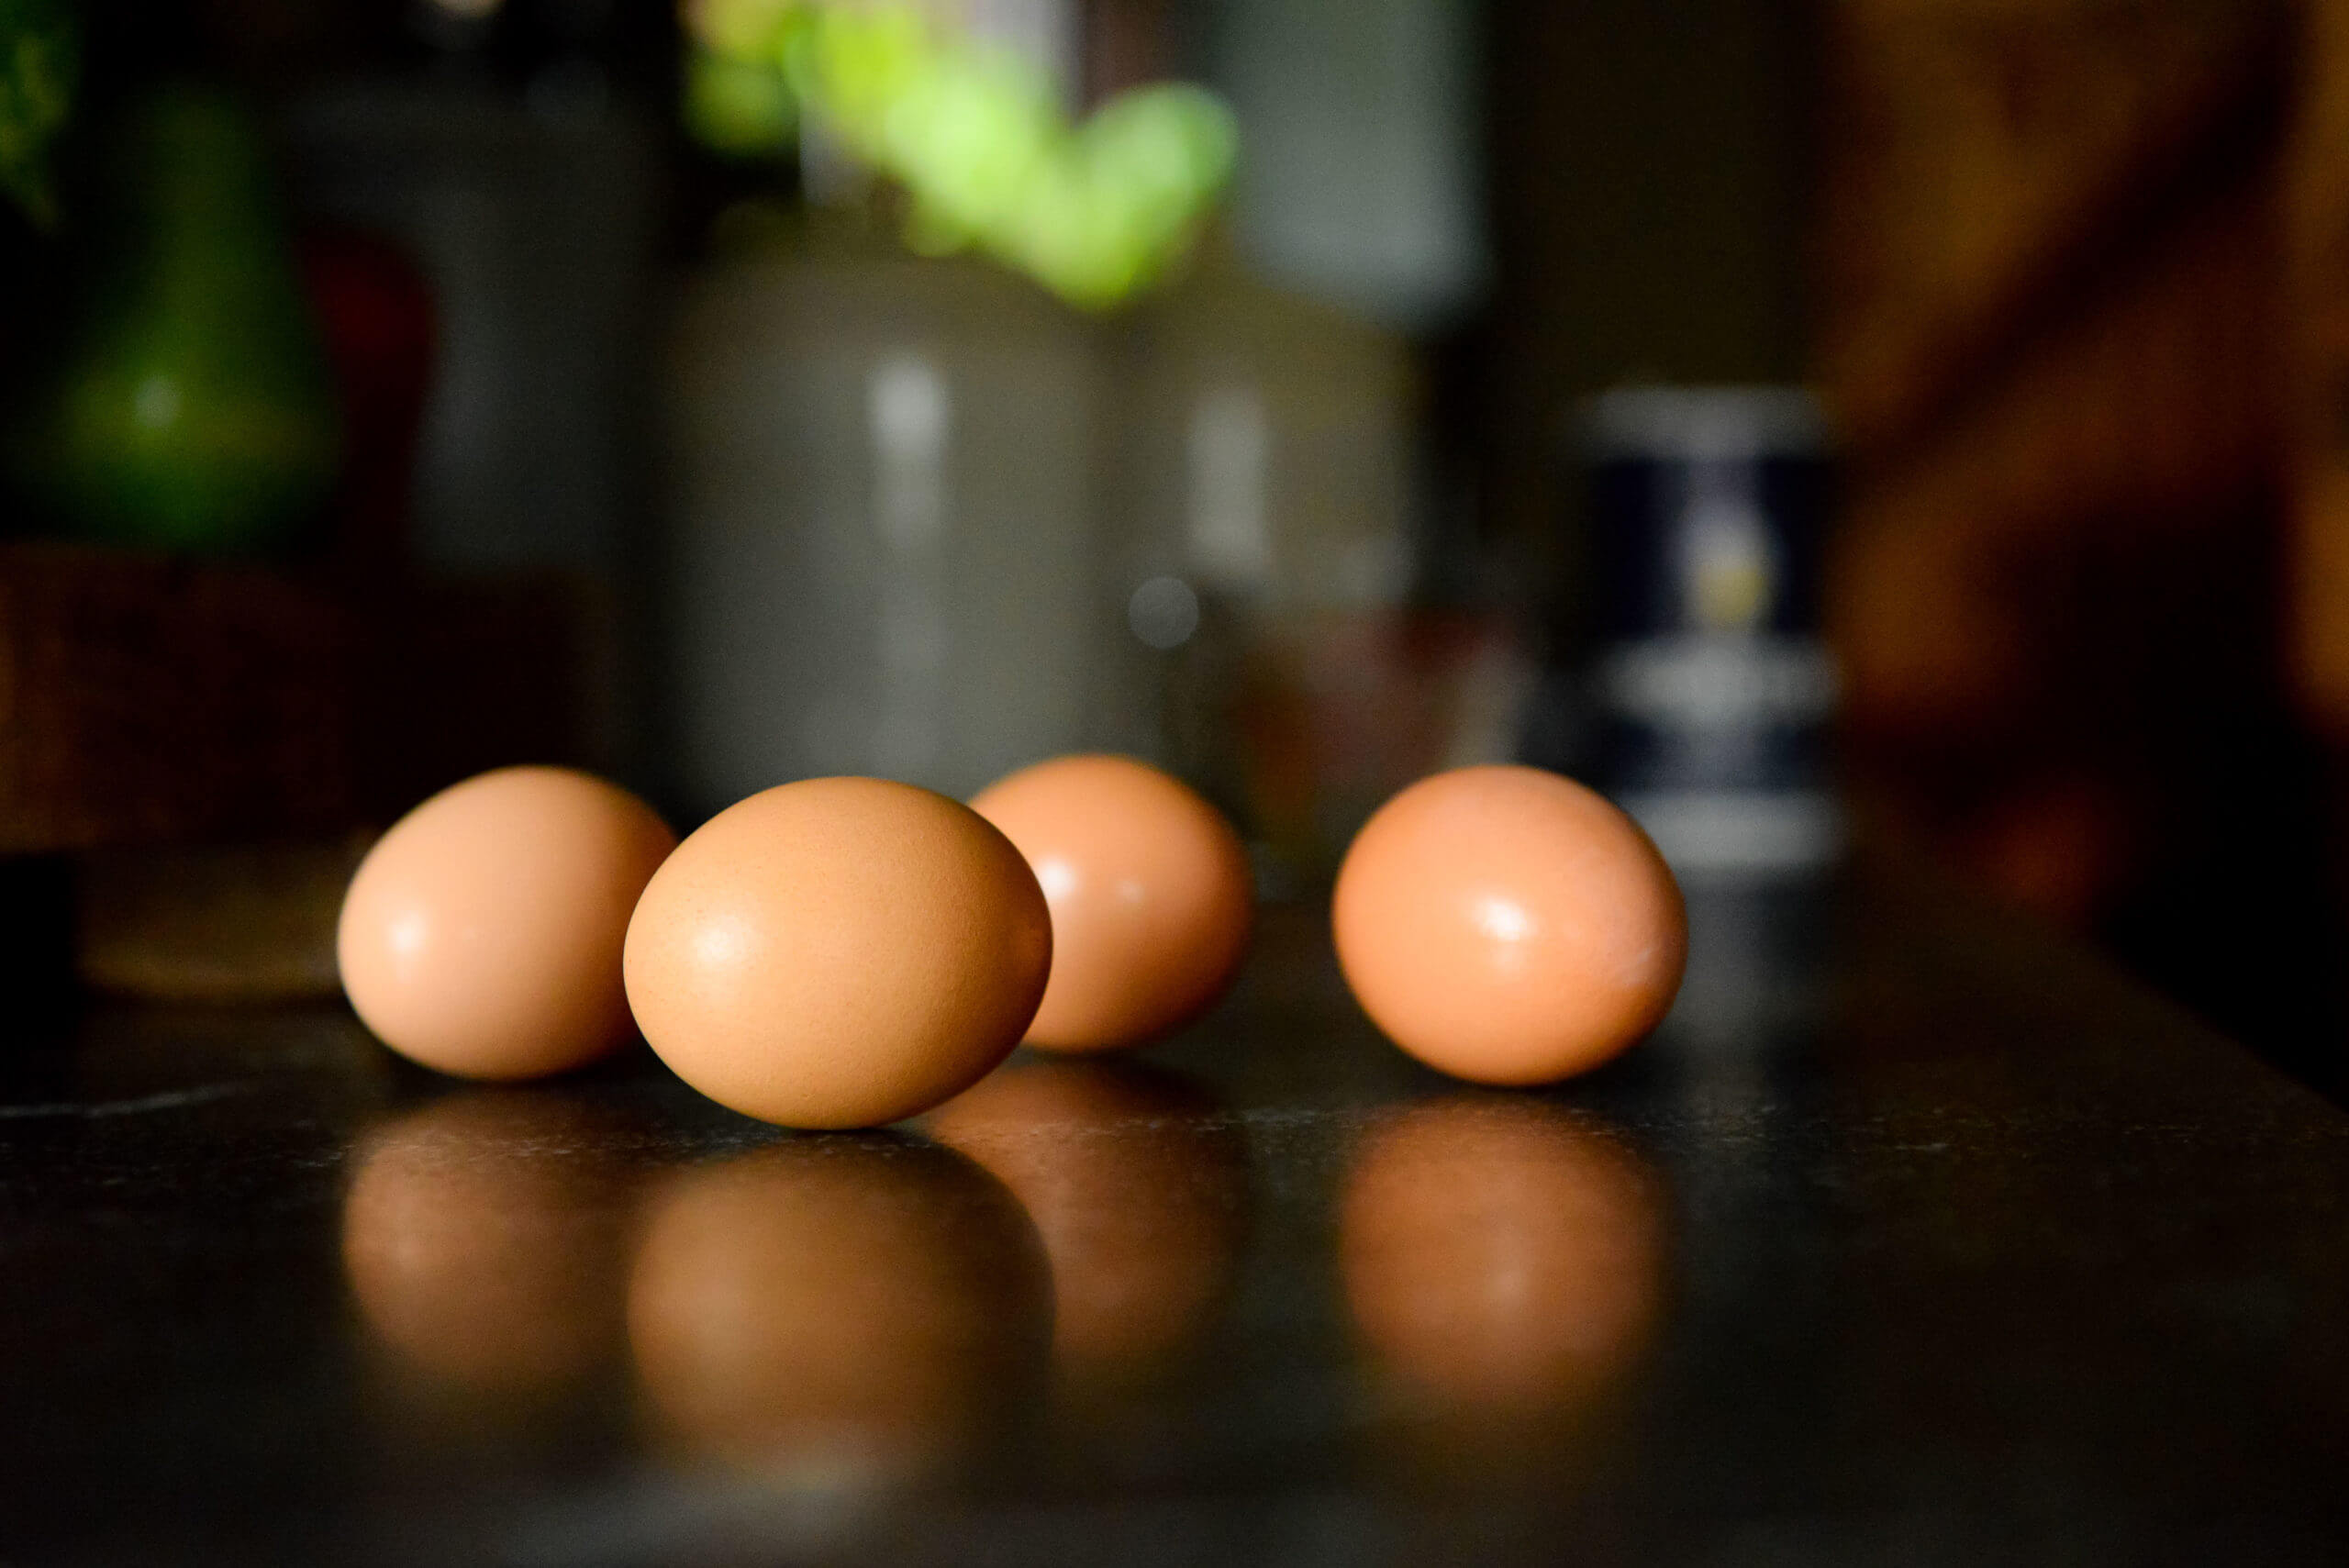 Four eggs on a table. The reflection of the eggs is visible on the table.